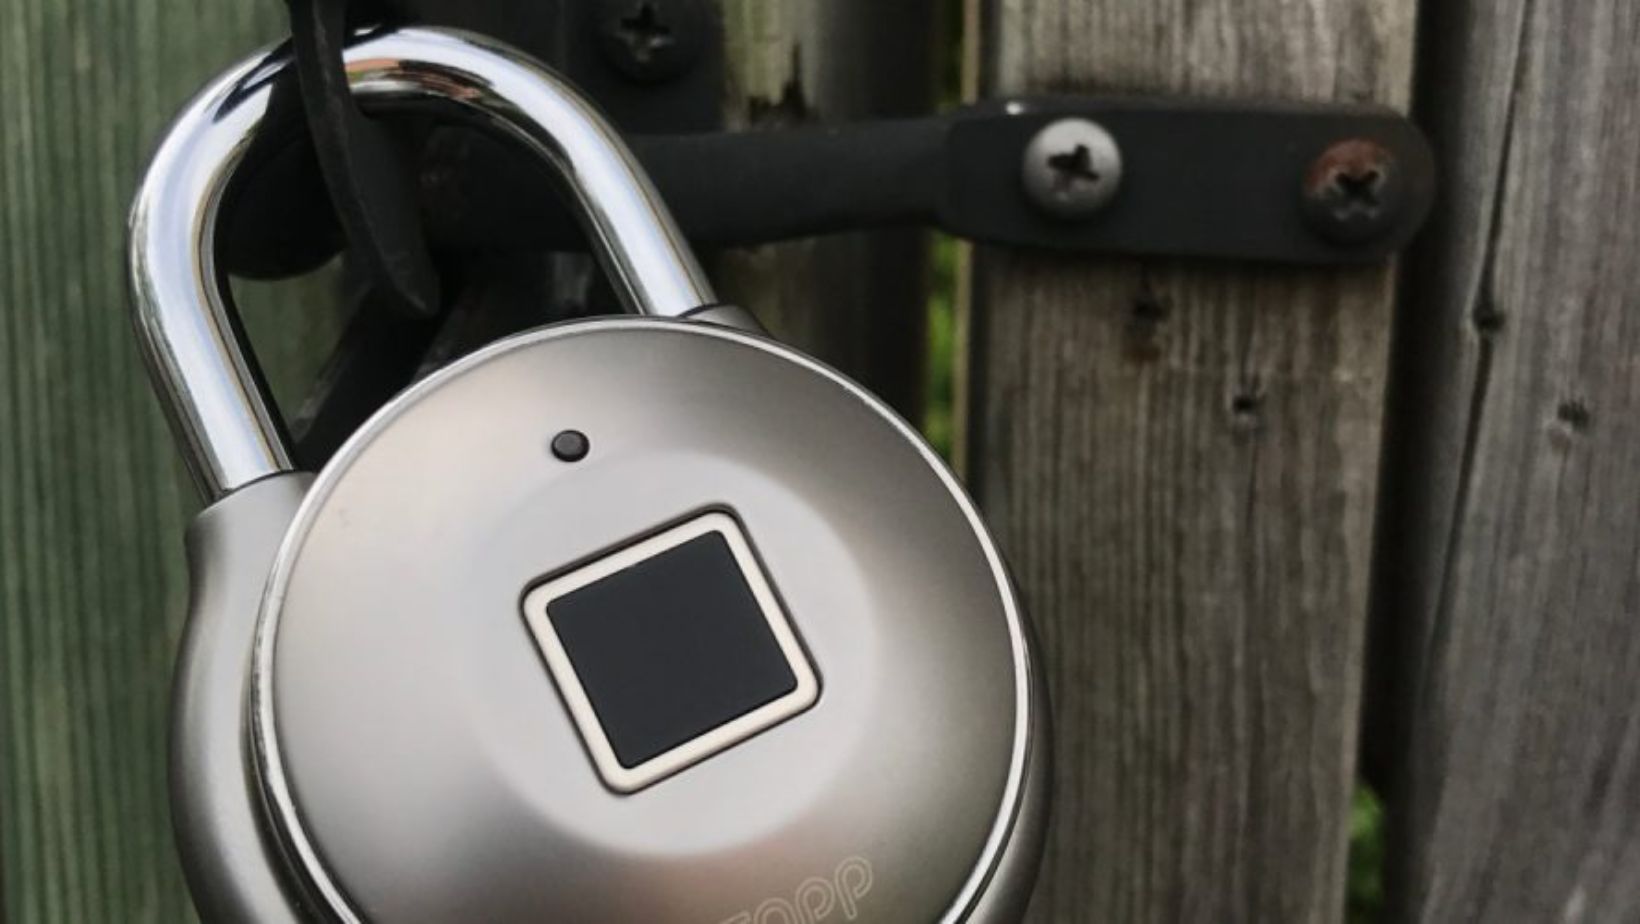 Fingerprint Padlock—Your Key to Save Time and Money